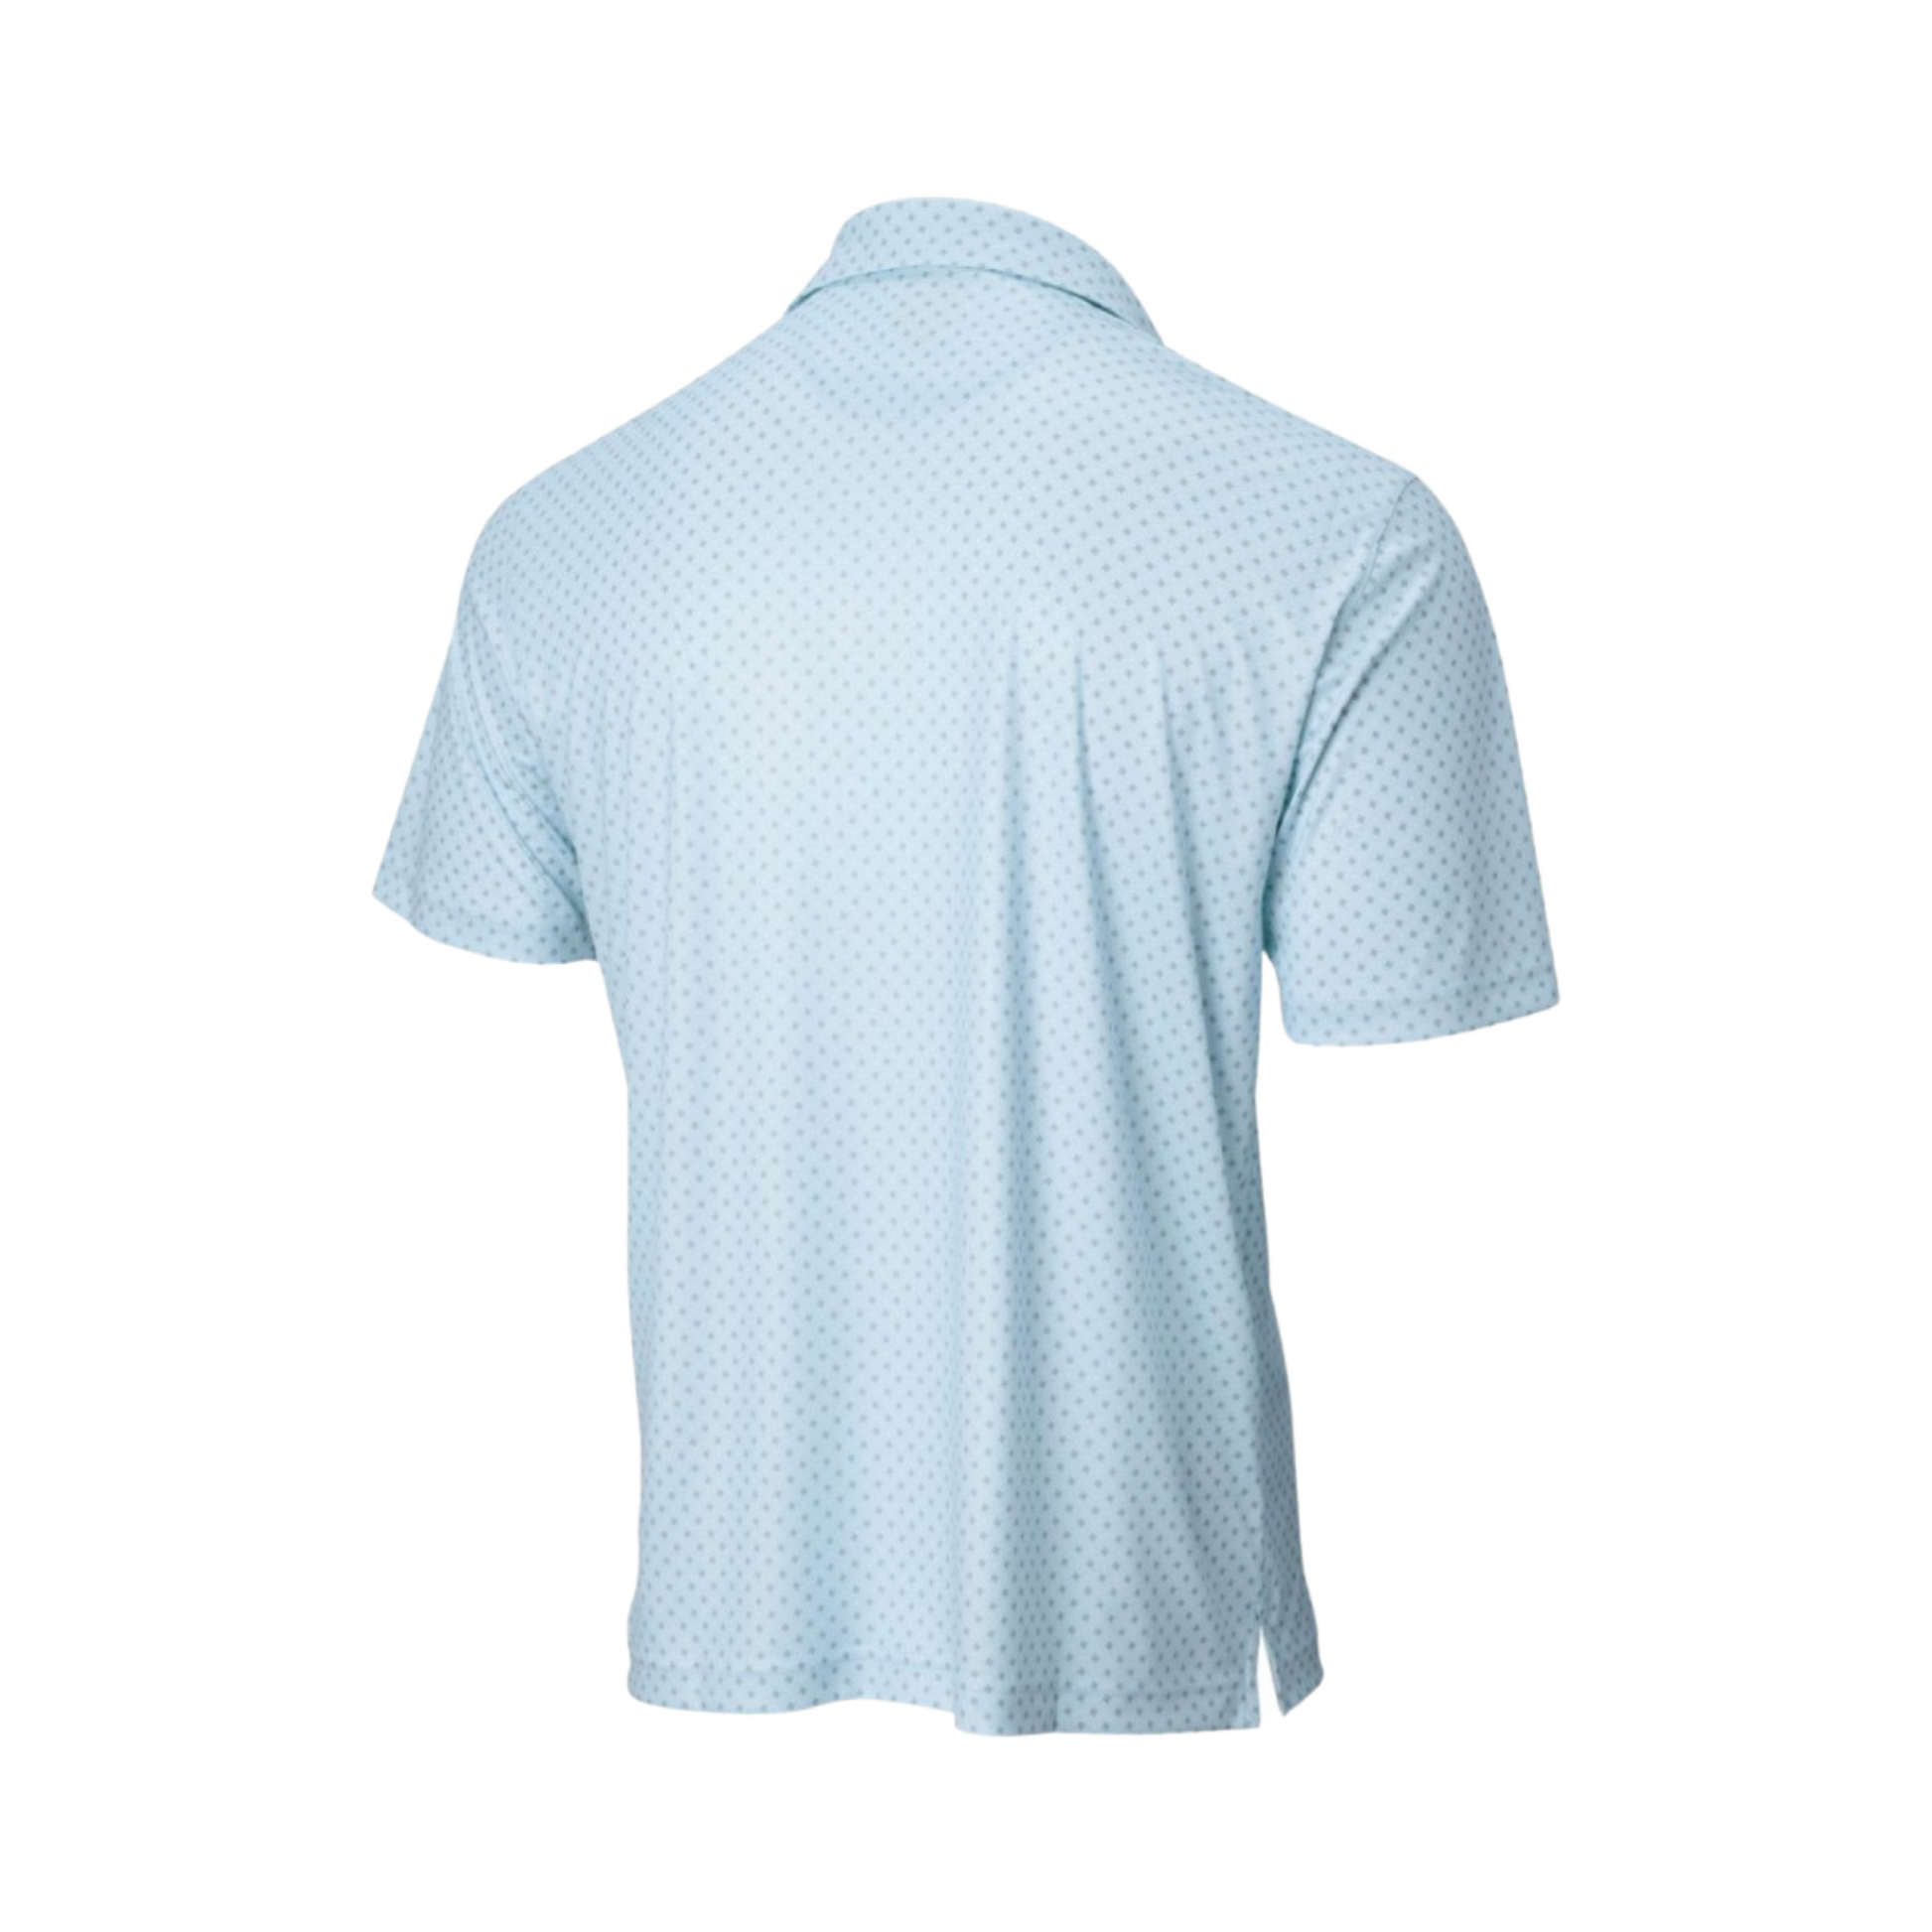 Greg Norman Men's FASH Light Blue Patterned Polo – The Sea Pines Resort ...